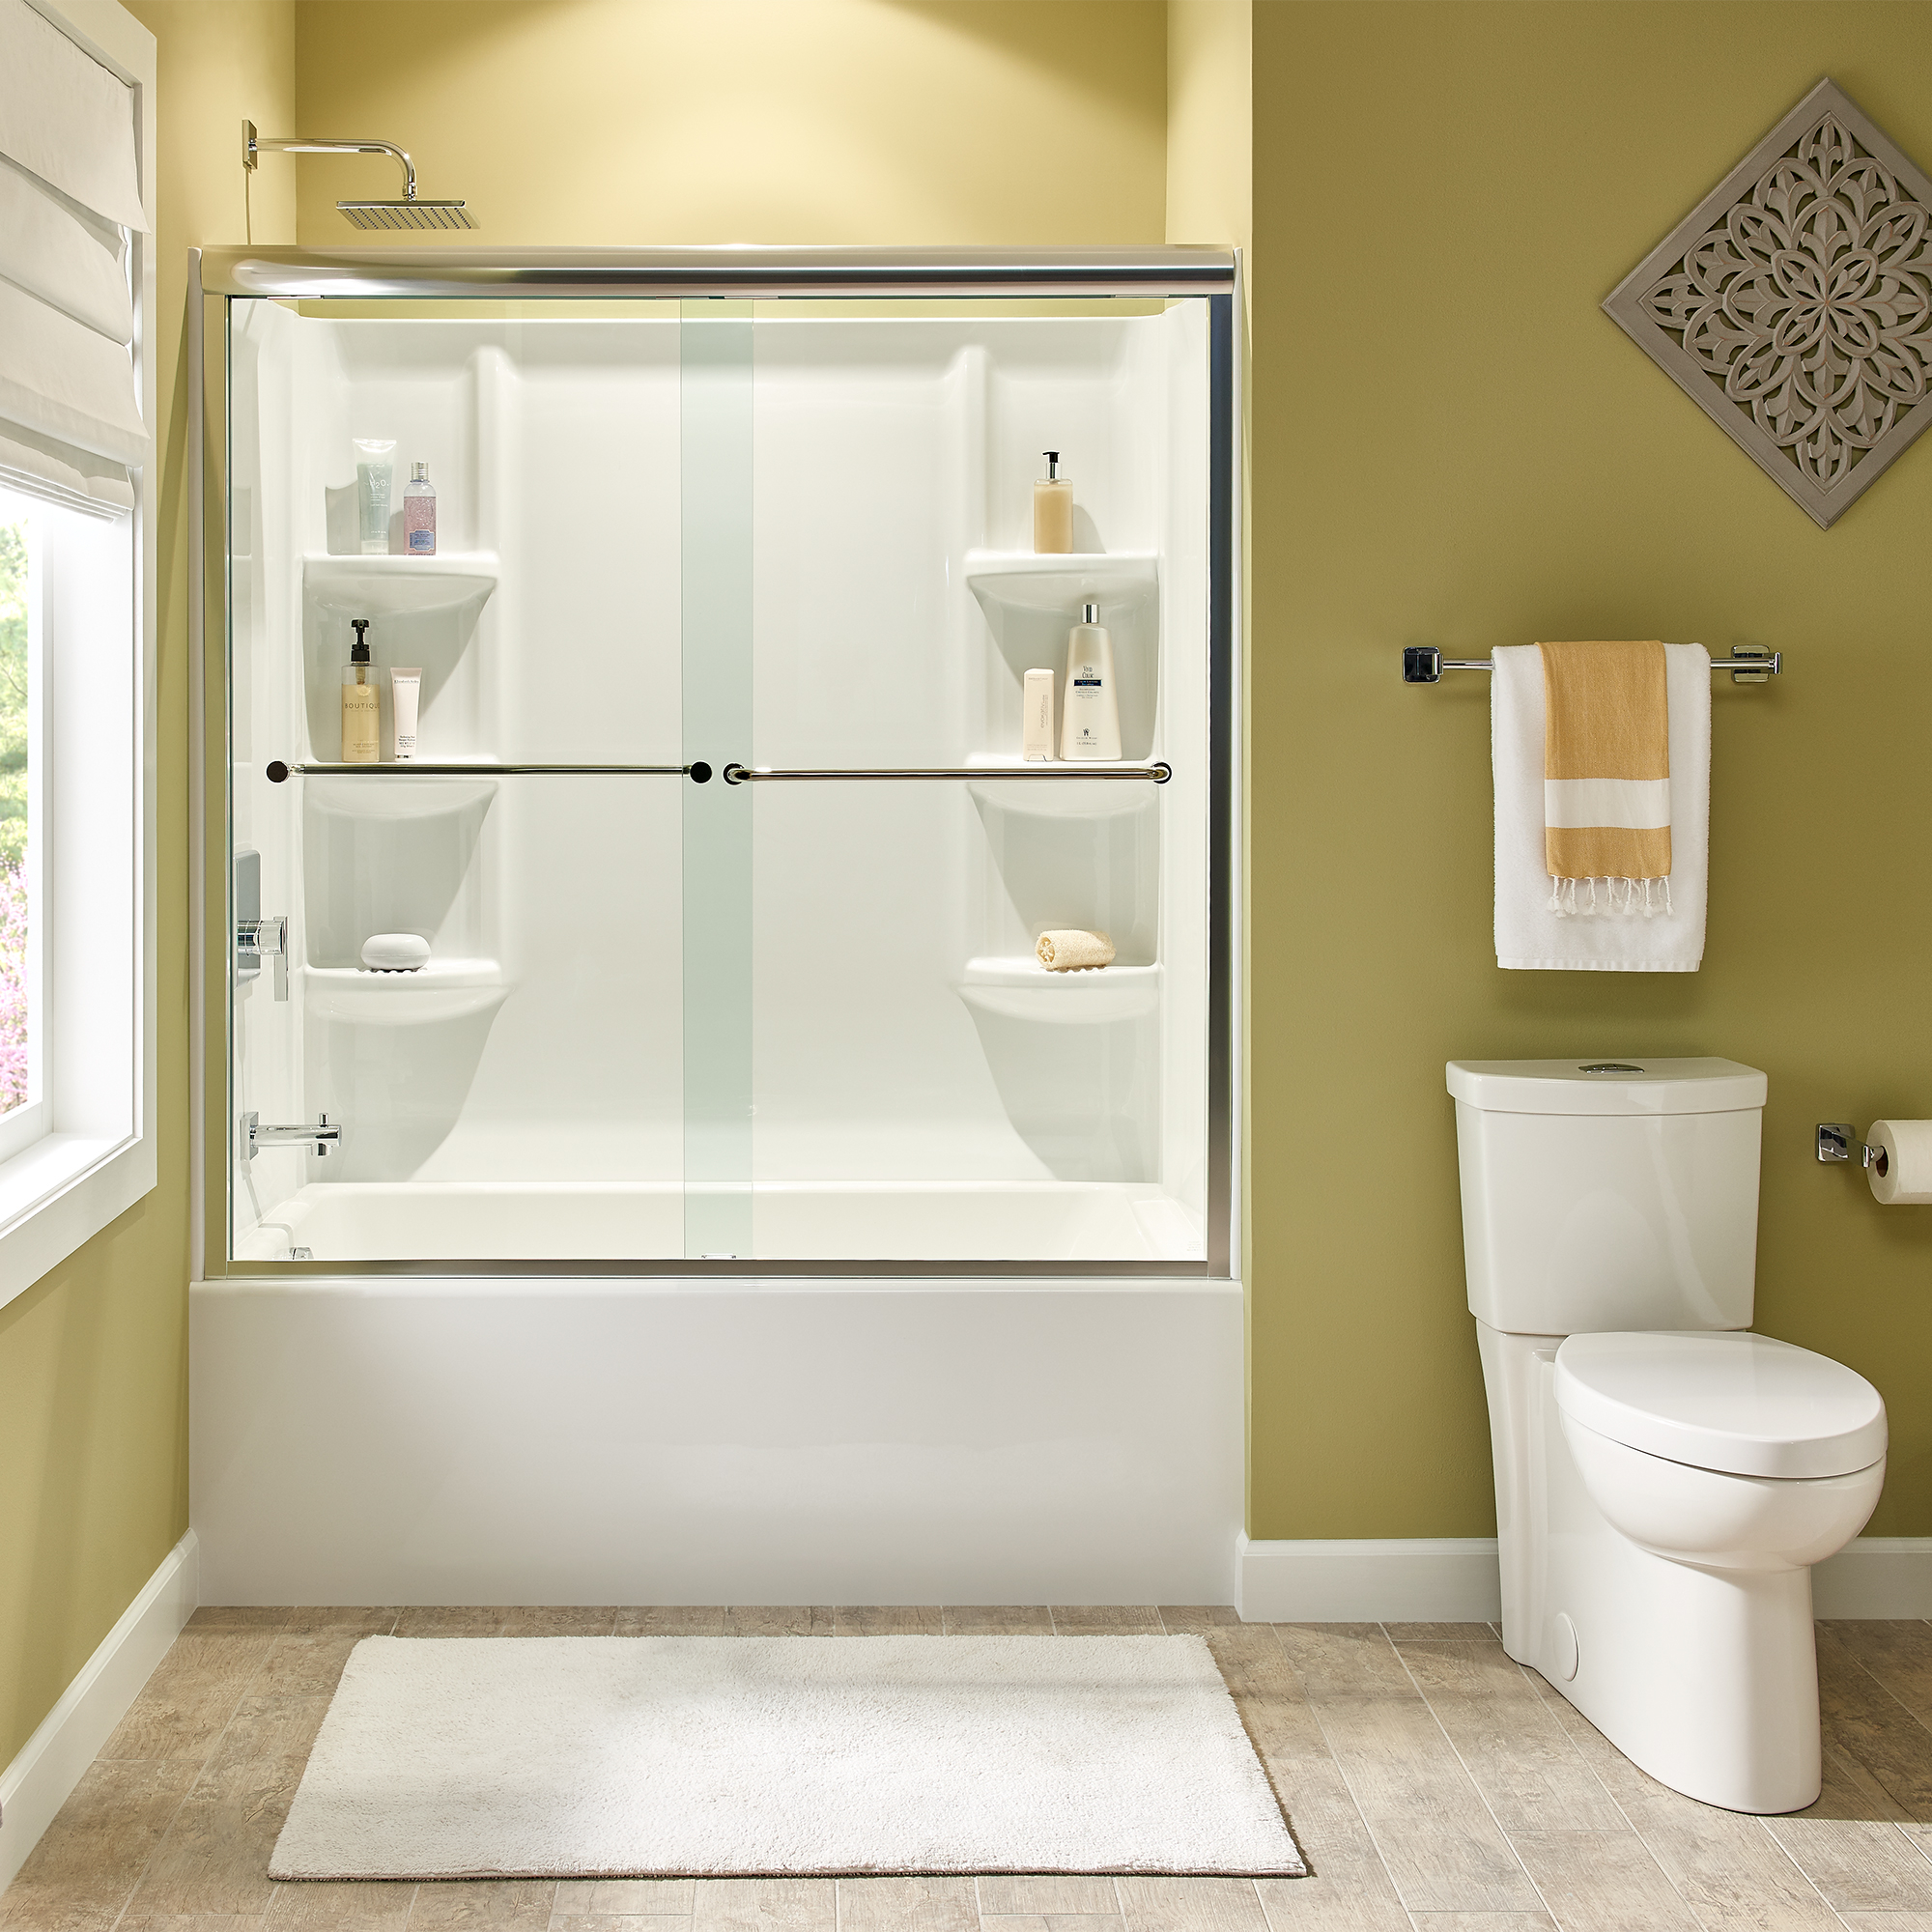 Tub Shower Walls American Standard intended for size 2000 X 2000